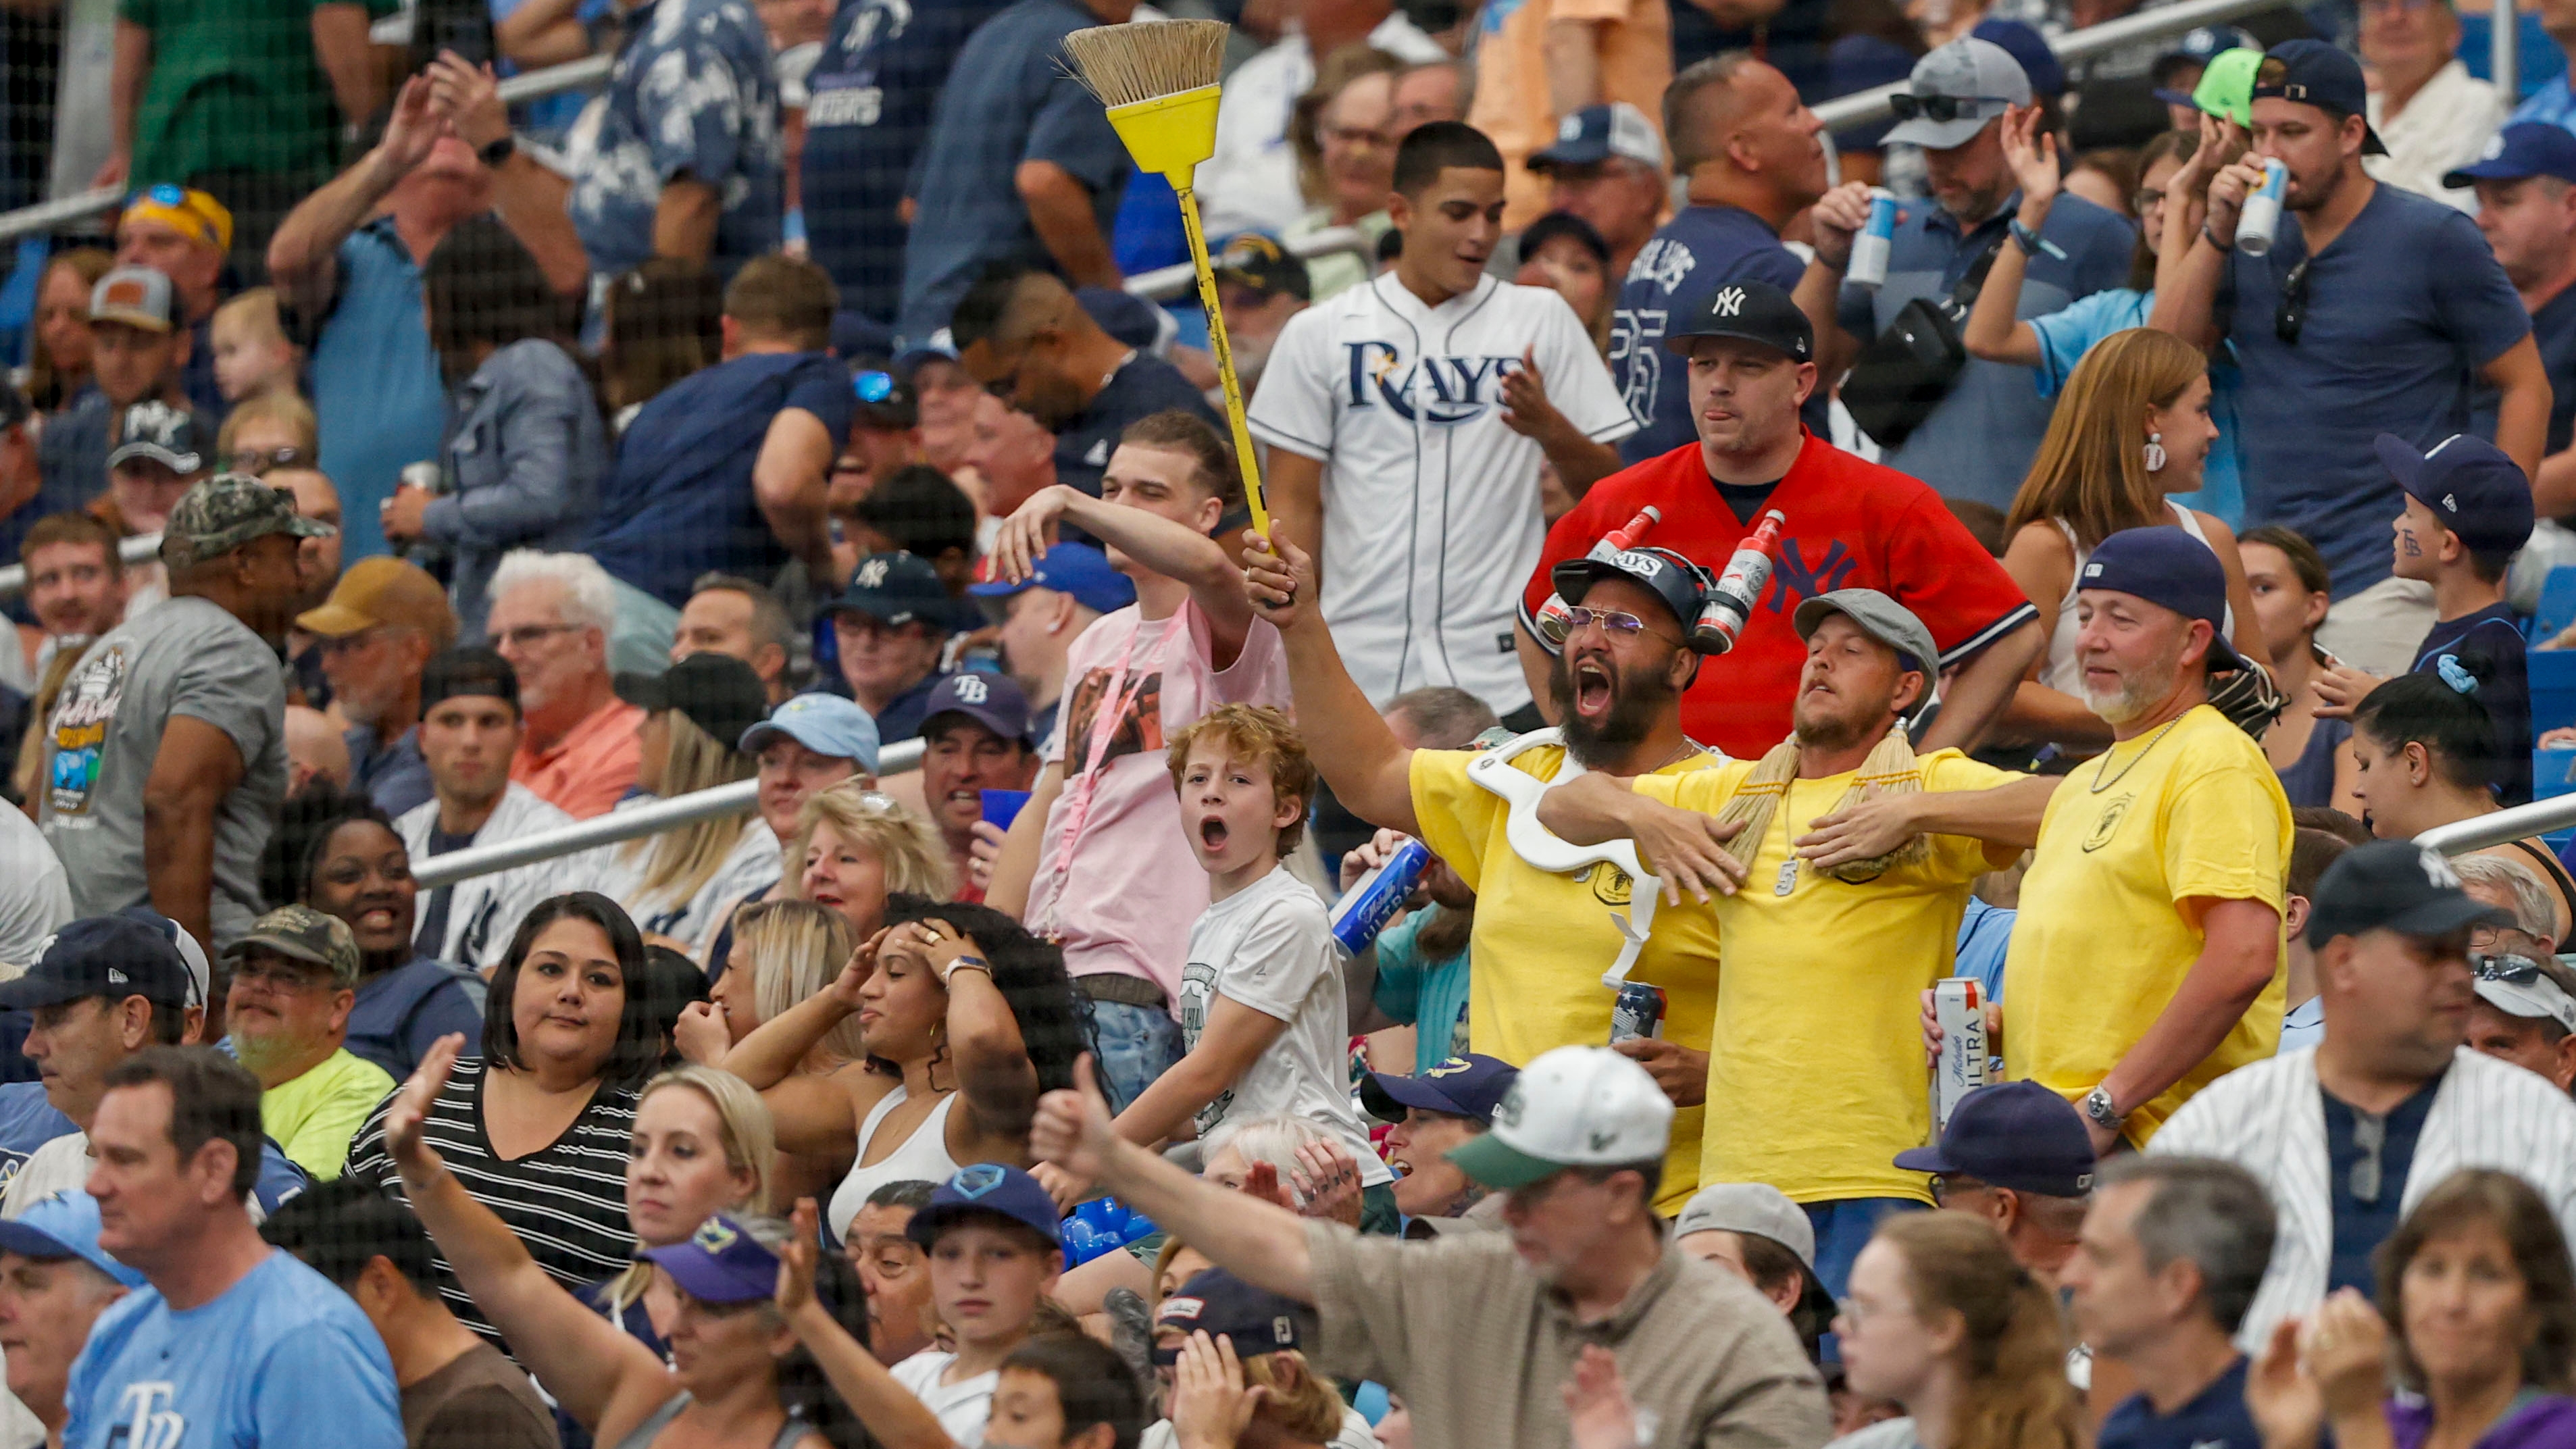 Rays announce “Kids Eat Free” promotion at Tropicana Field through